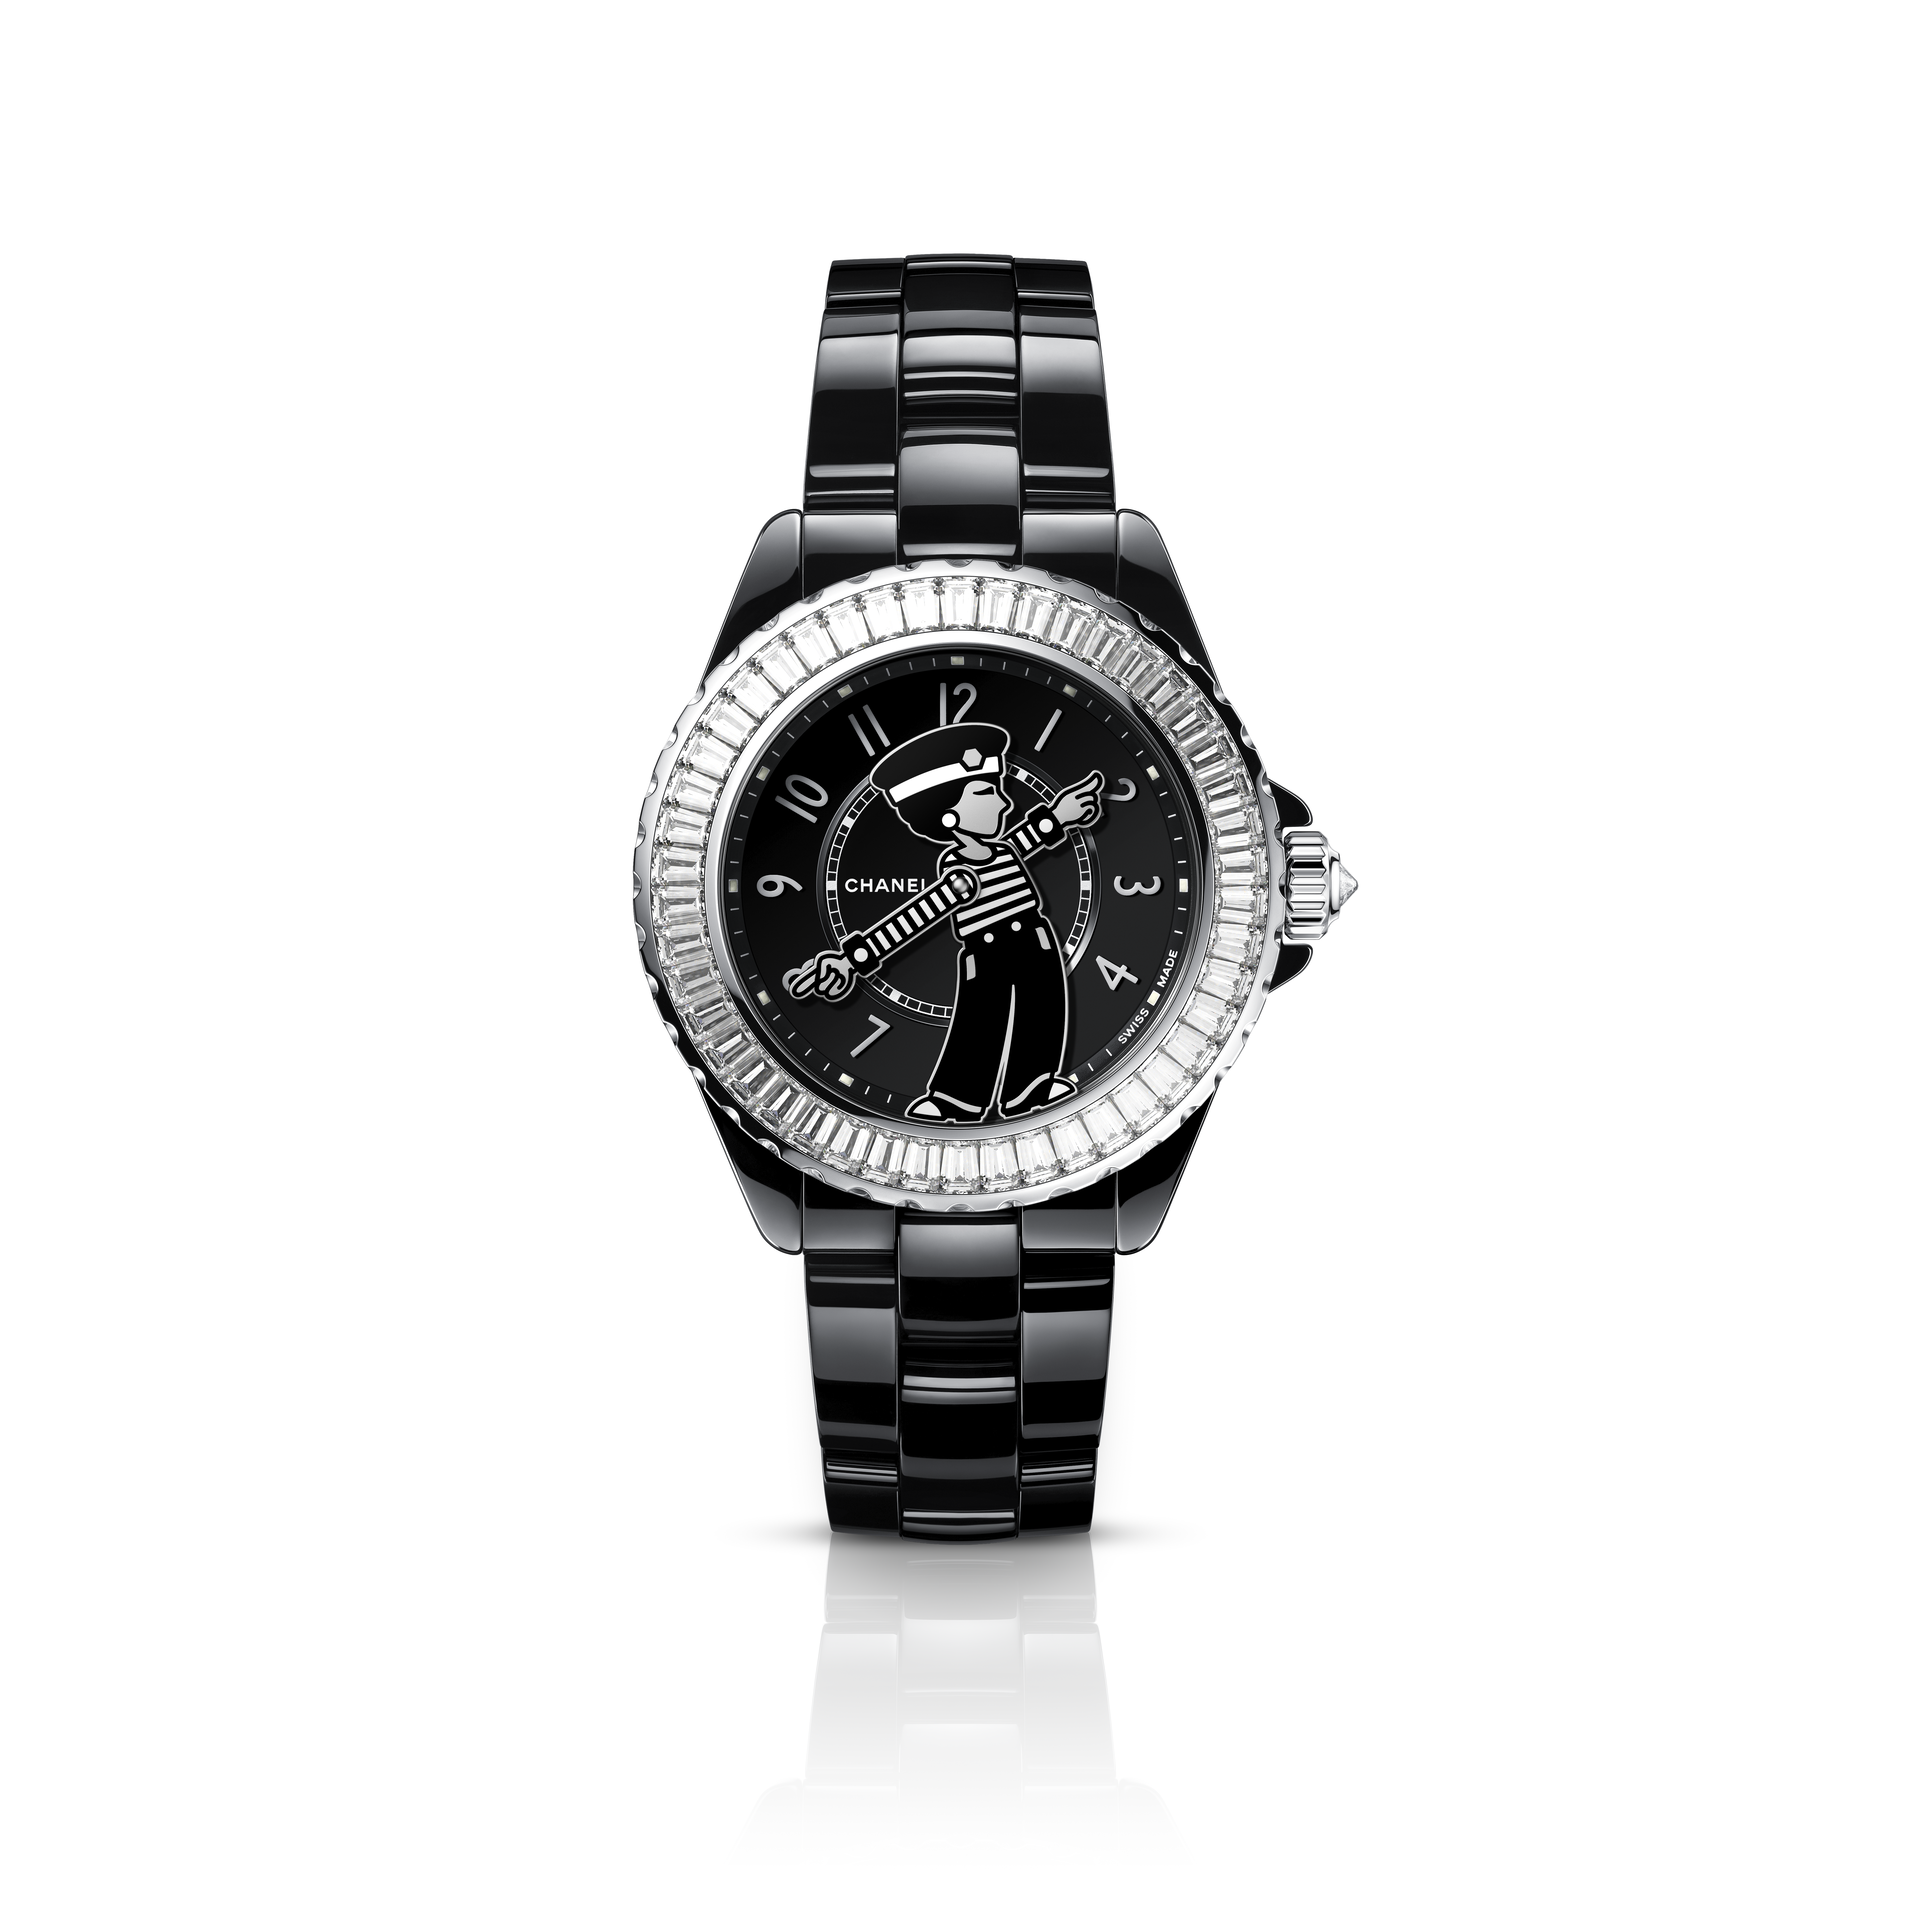 These are the new Chanel J12 watches unveiled at Watches and